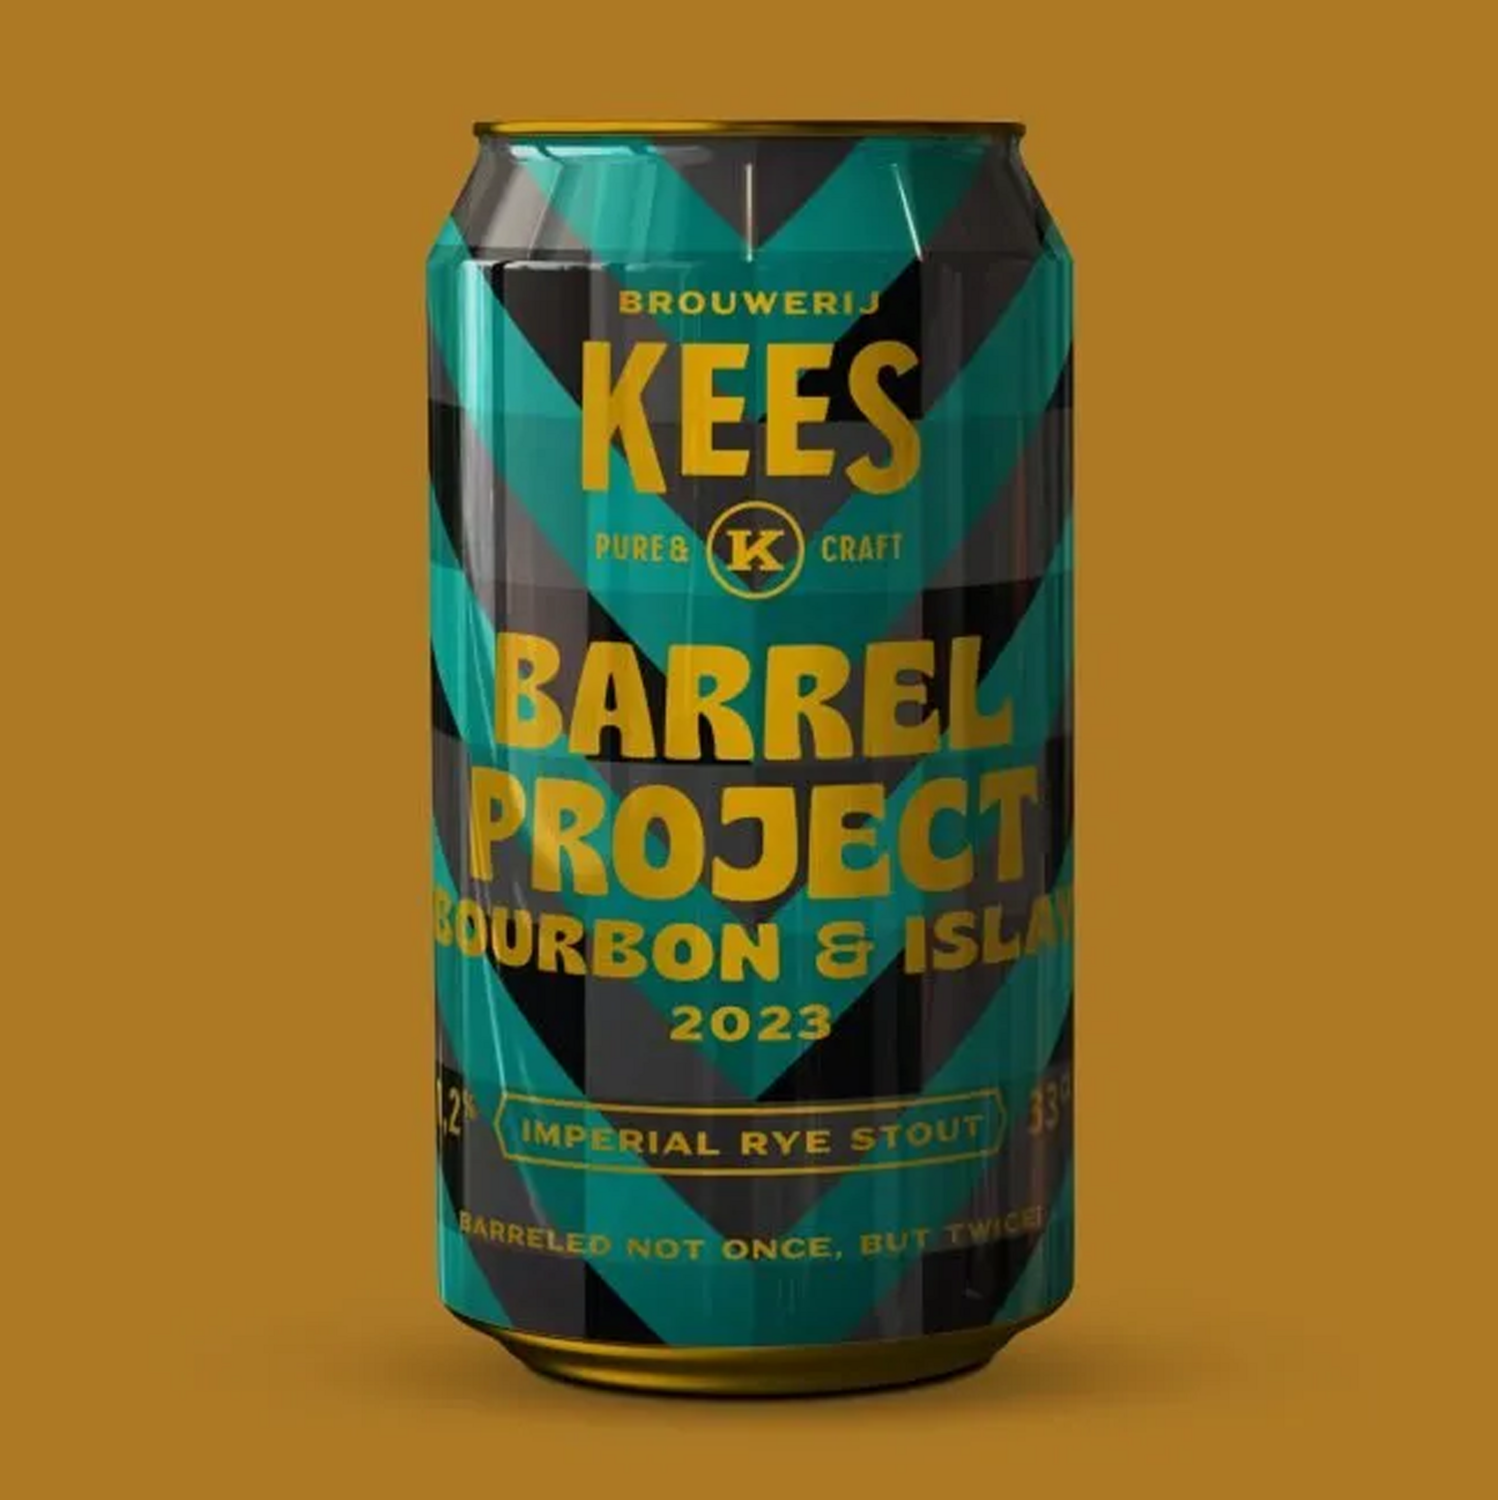 Kees Barrel Project Bourbon & Islay 2023 BA Imperial Rye Stout